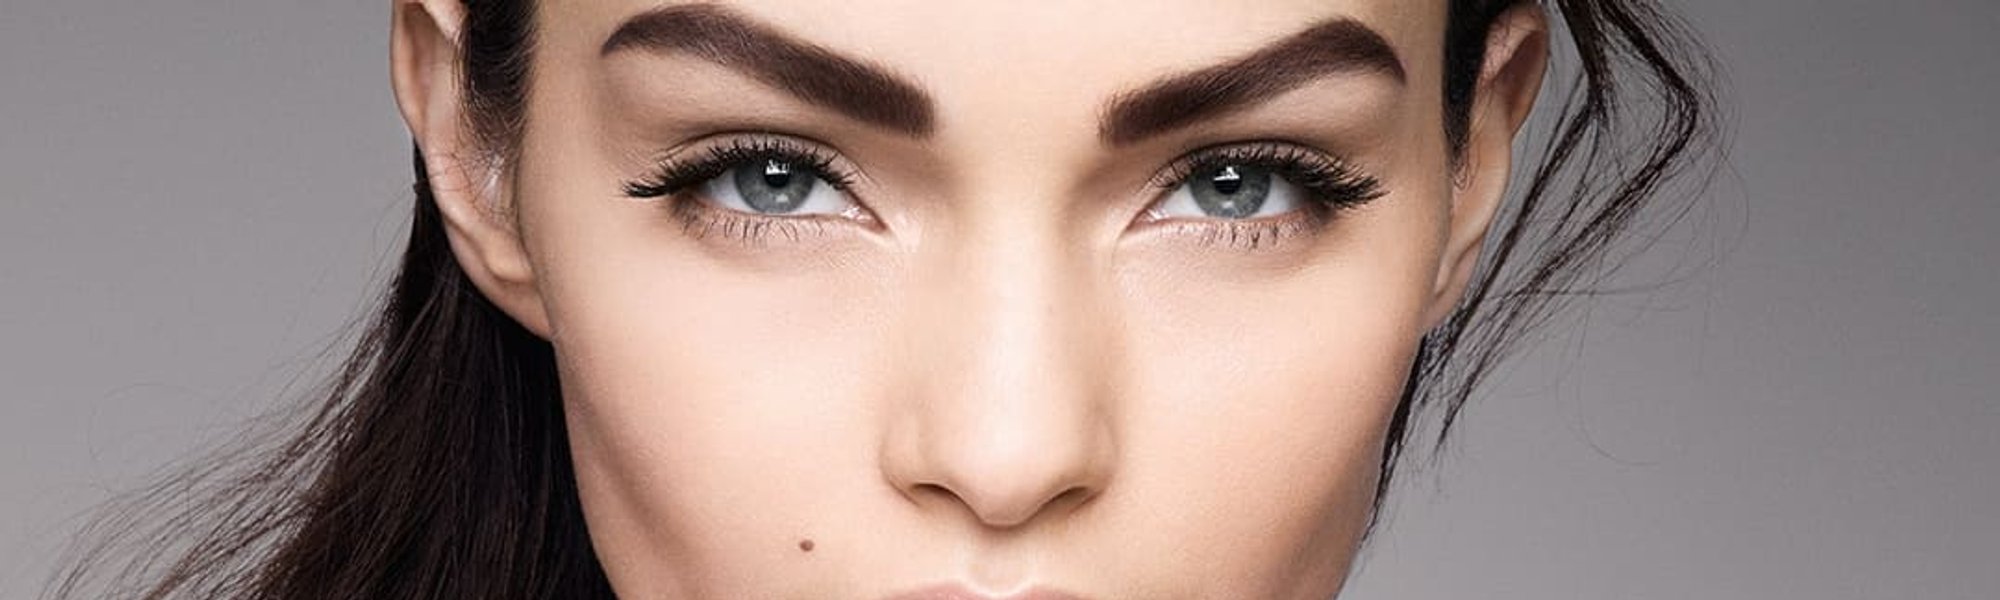 Get Eyebrows That Wow 1080x476